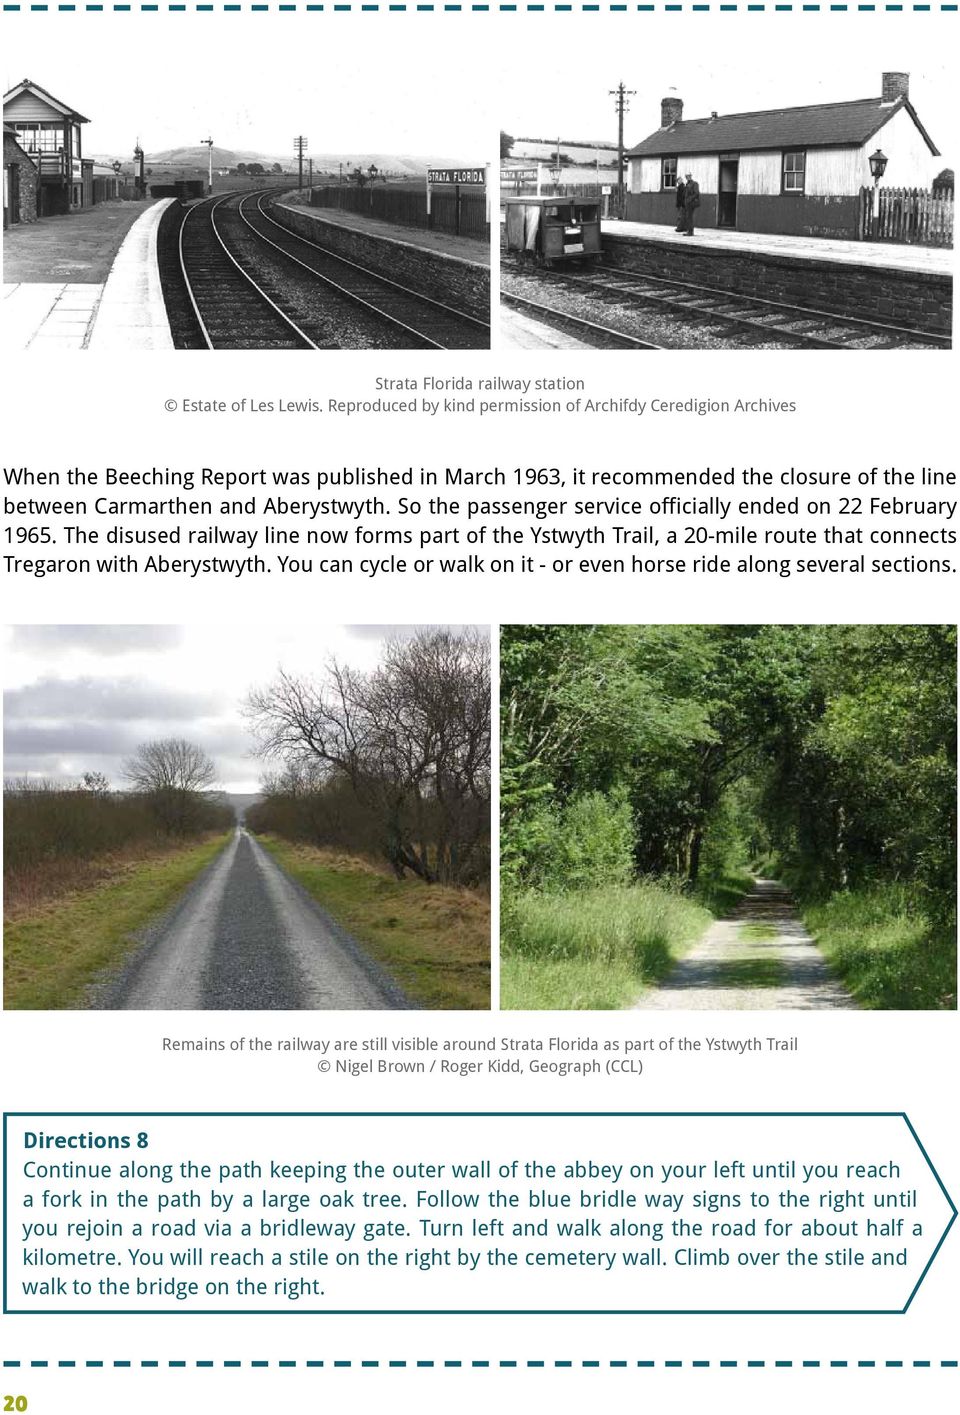 So the passenger service officially ended on 22 February 1965. The disused railway line now forms part of the Ystwyth Trail, a 20-mile route that connects Tregaron with Aberystwyth.